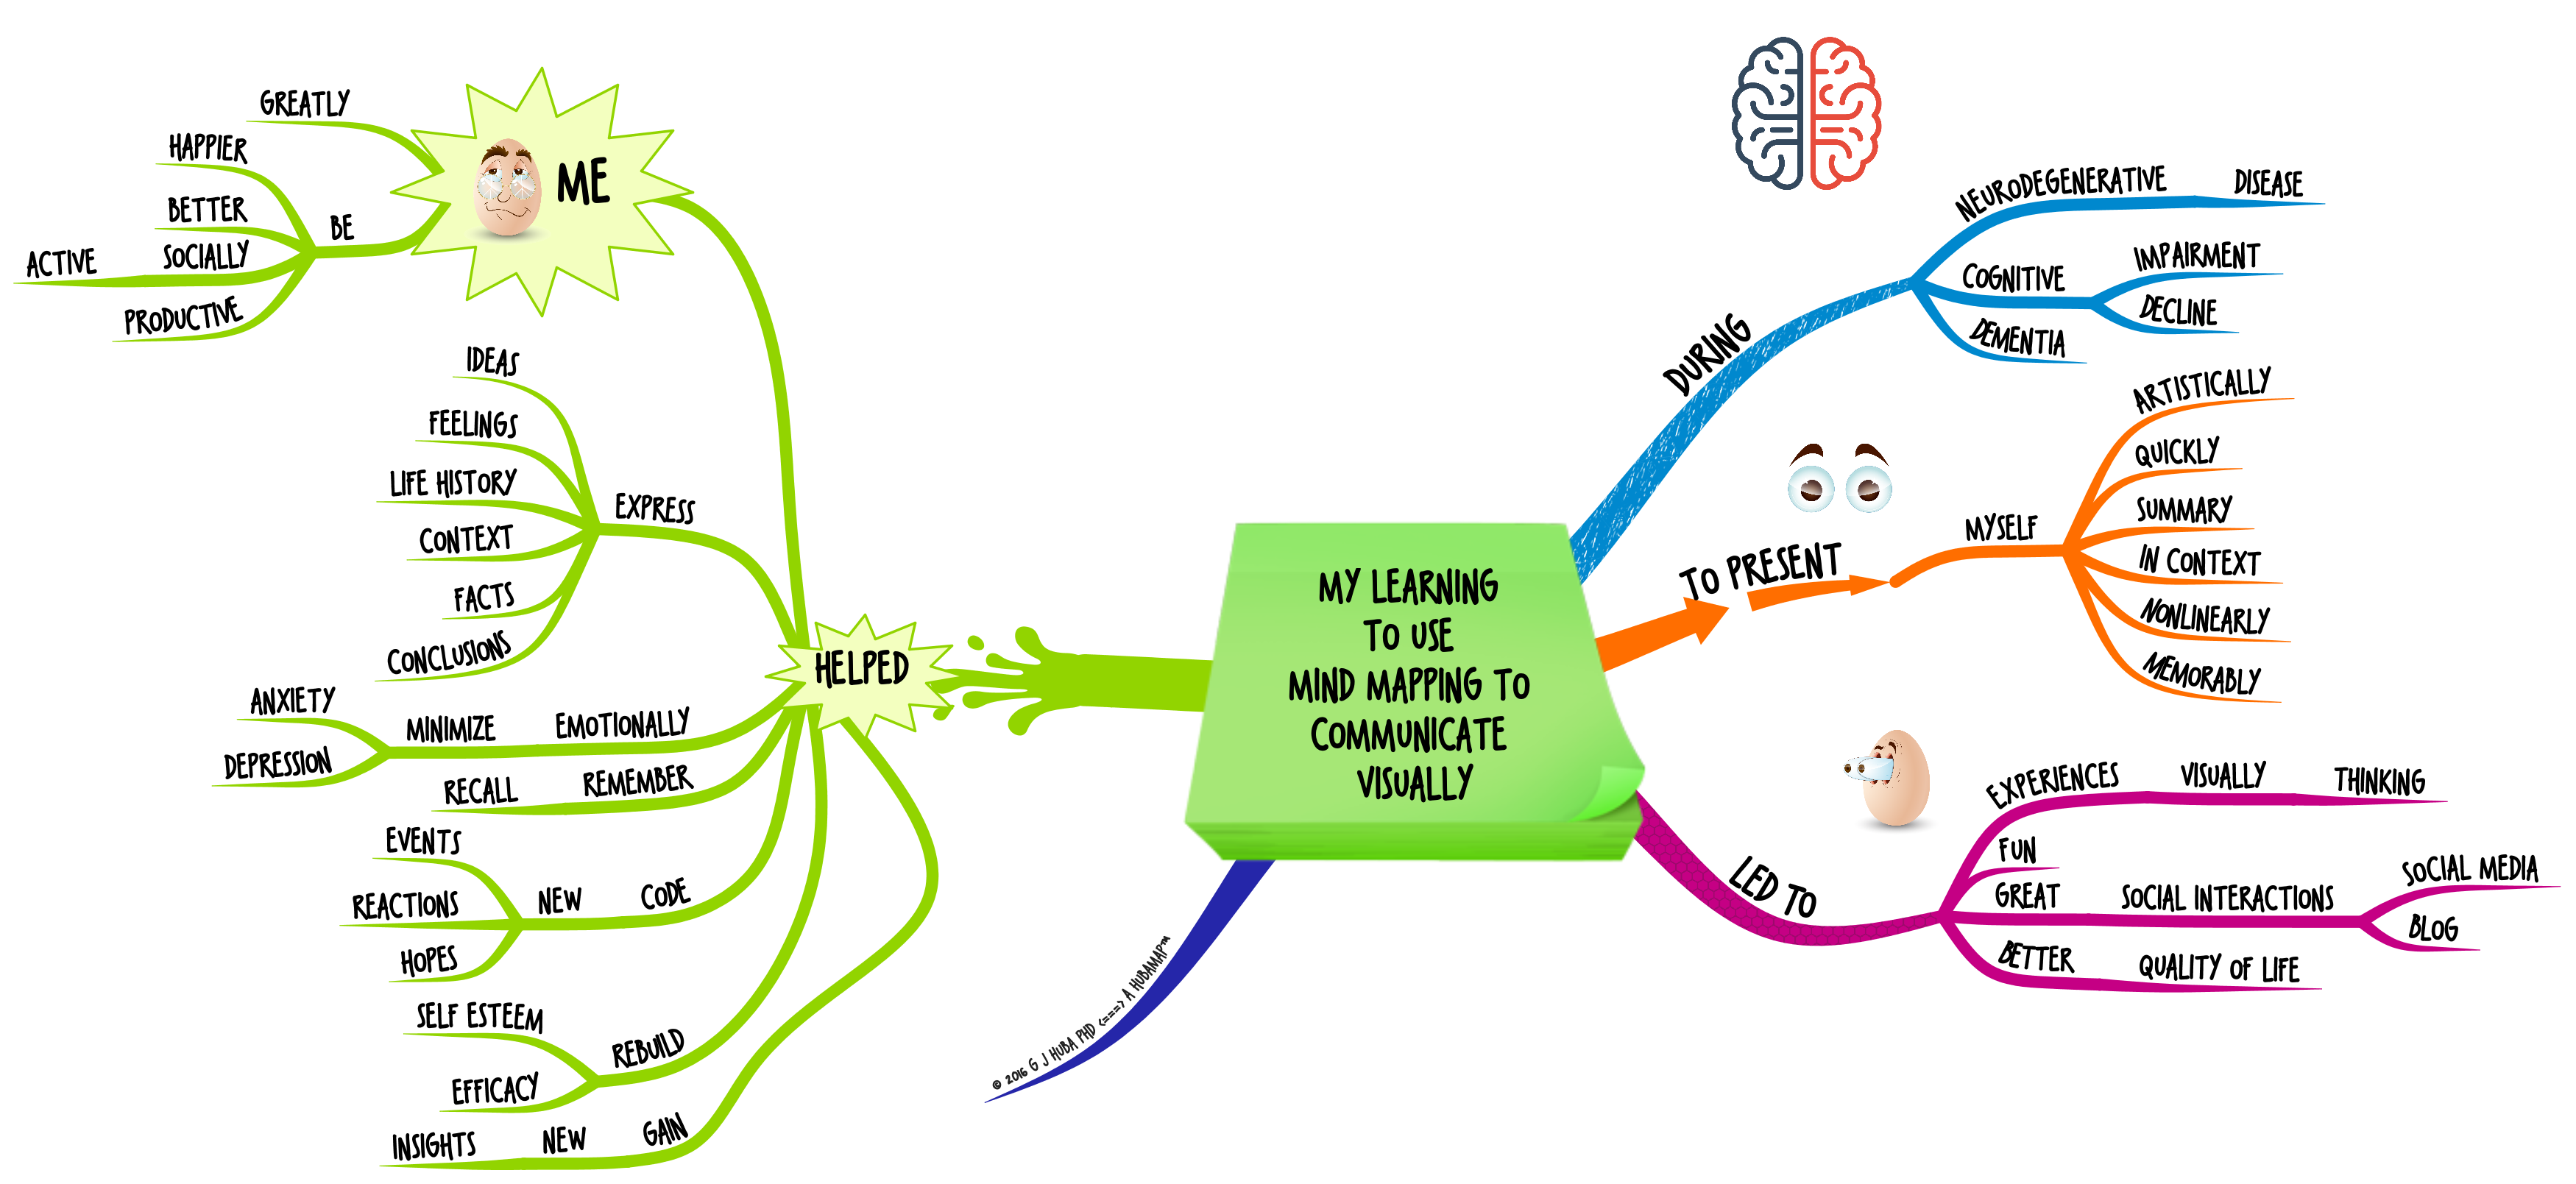 MY LEARNING TO USE MIND MAPPING TO COMMUNICATE VISUALLY